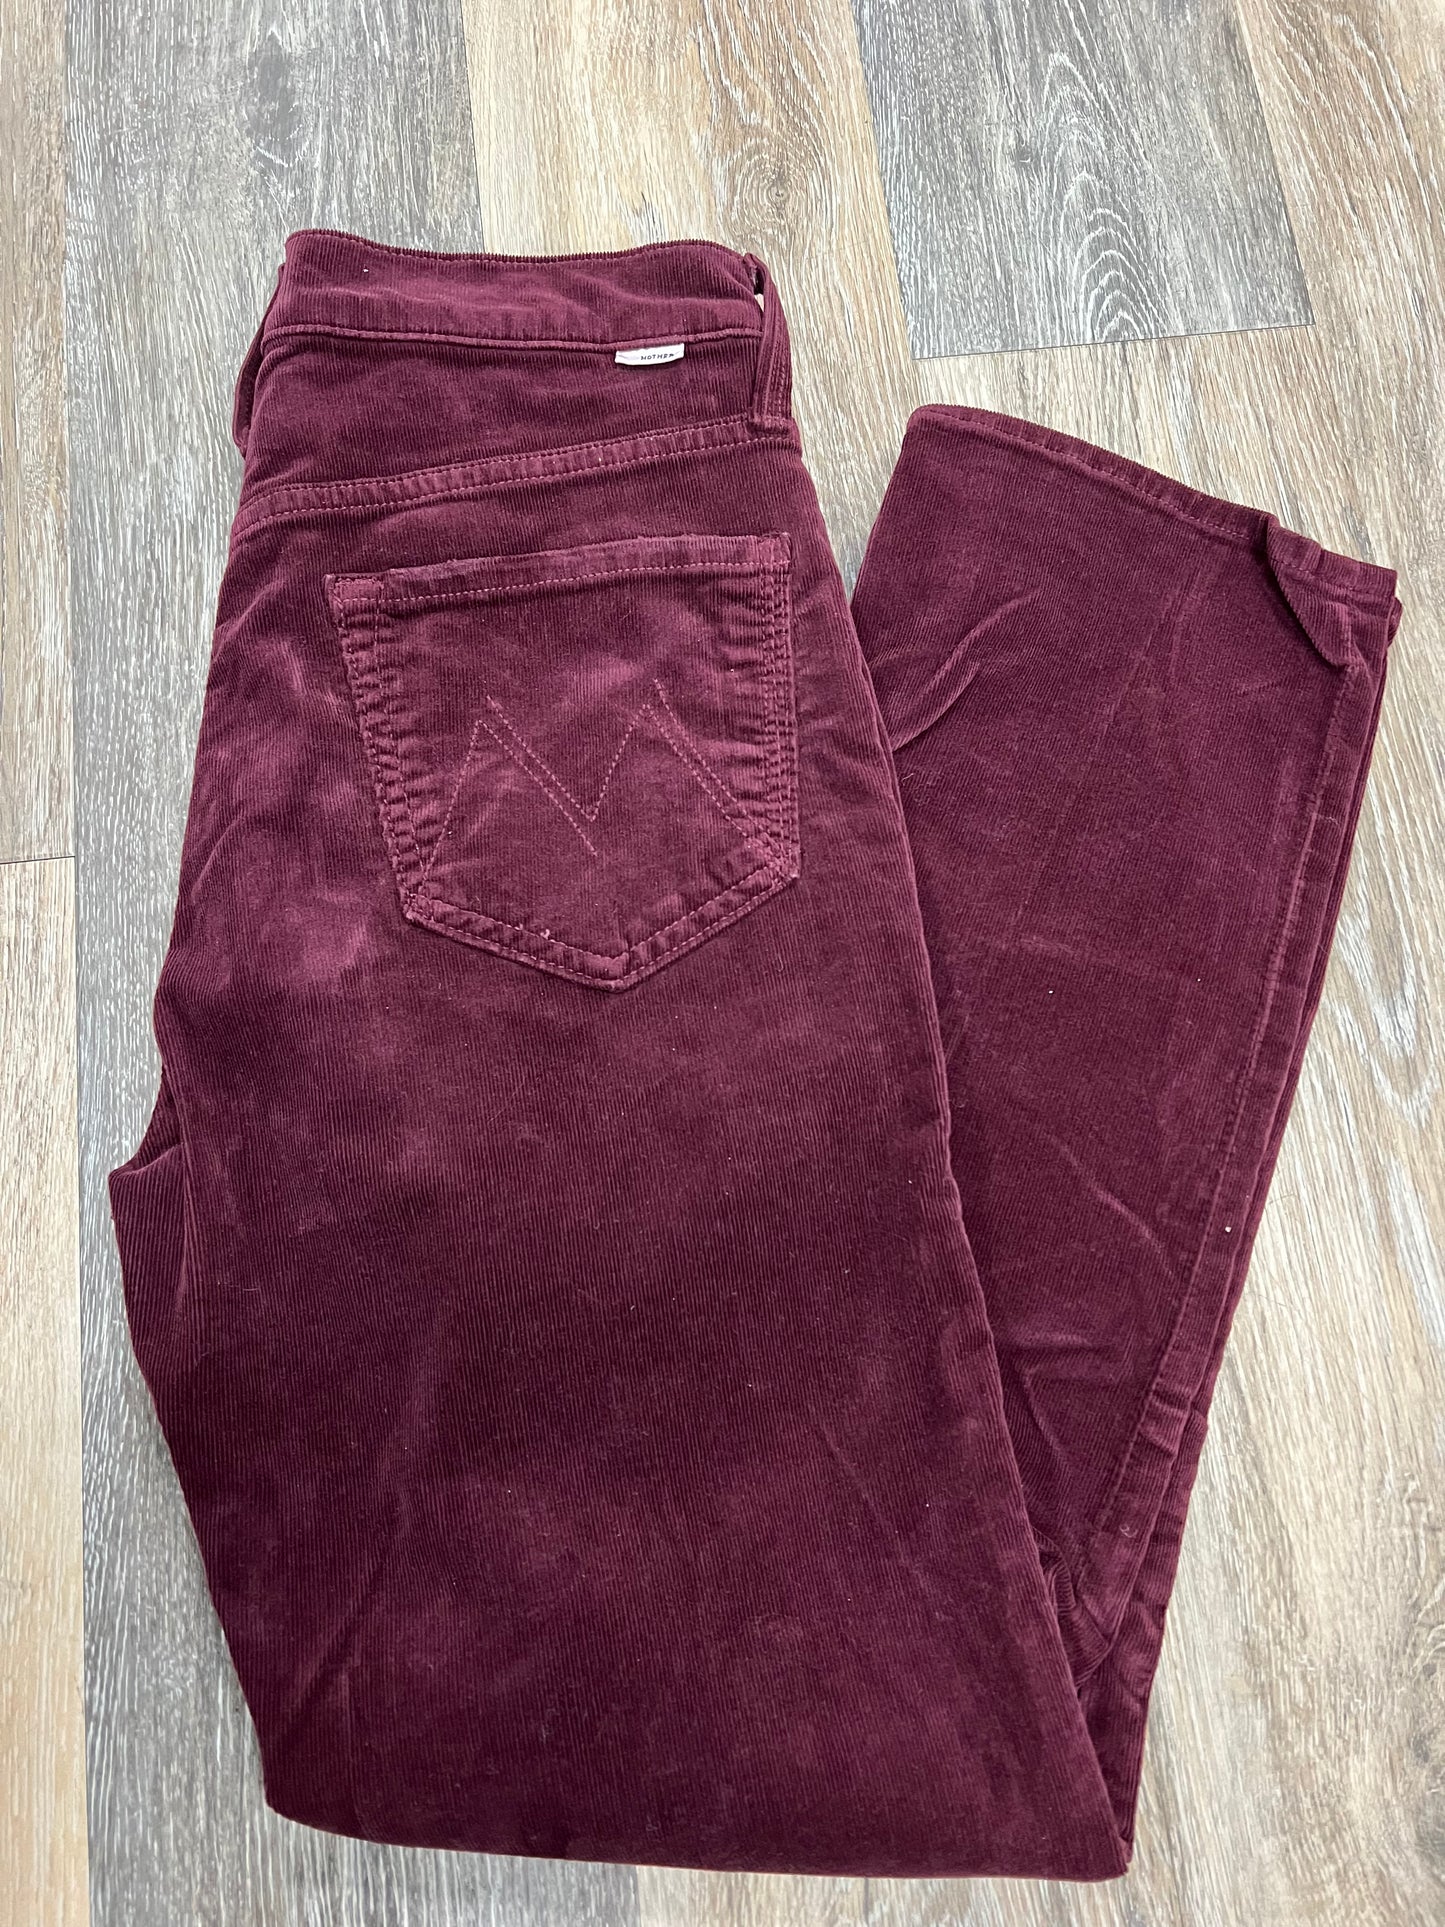 Pants Designer By Mother Jeans  Size: 2/26